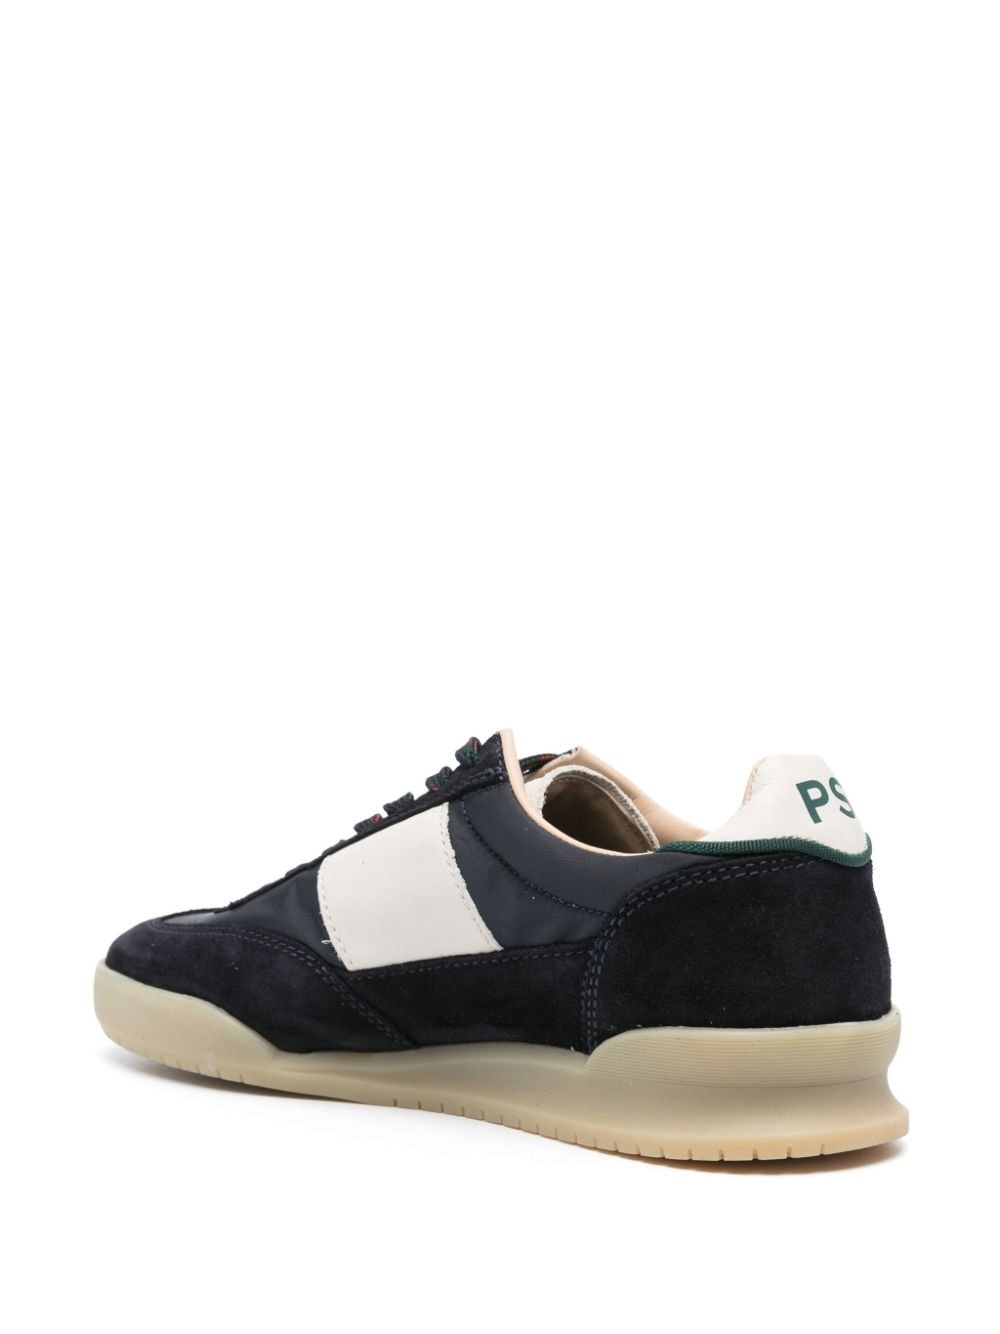 Paul Smith Sneakers Blue